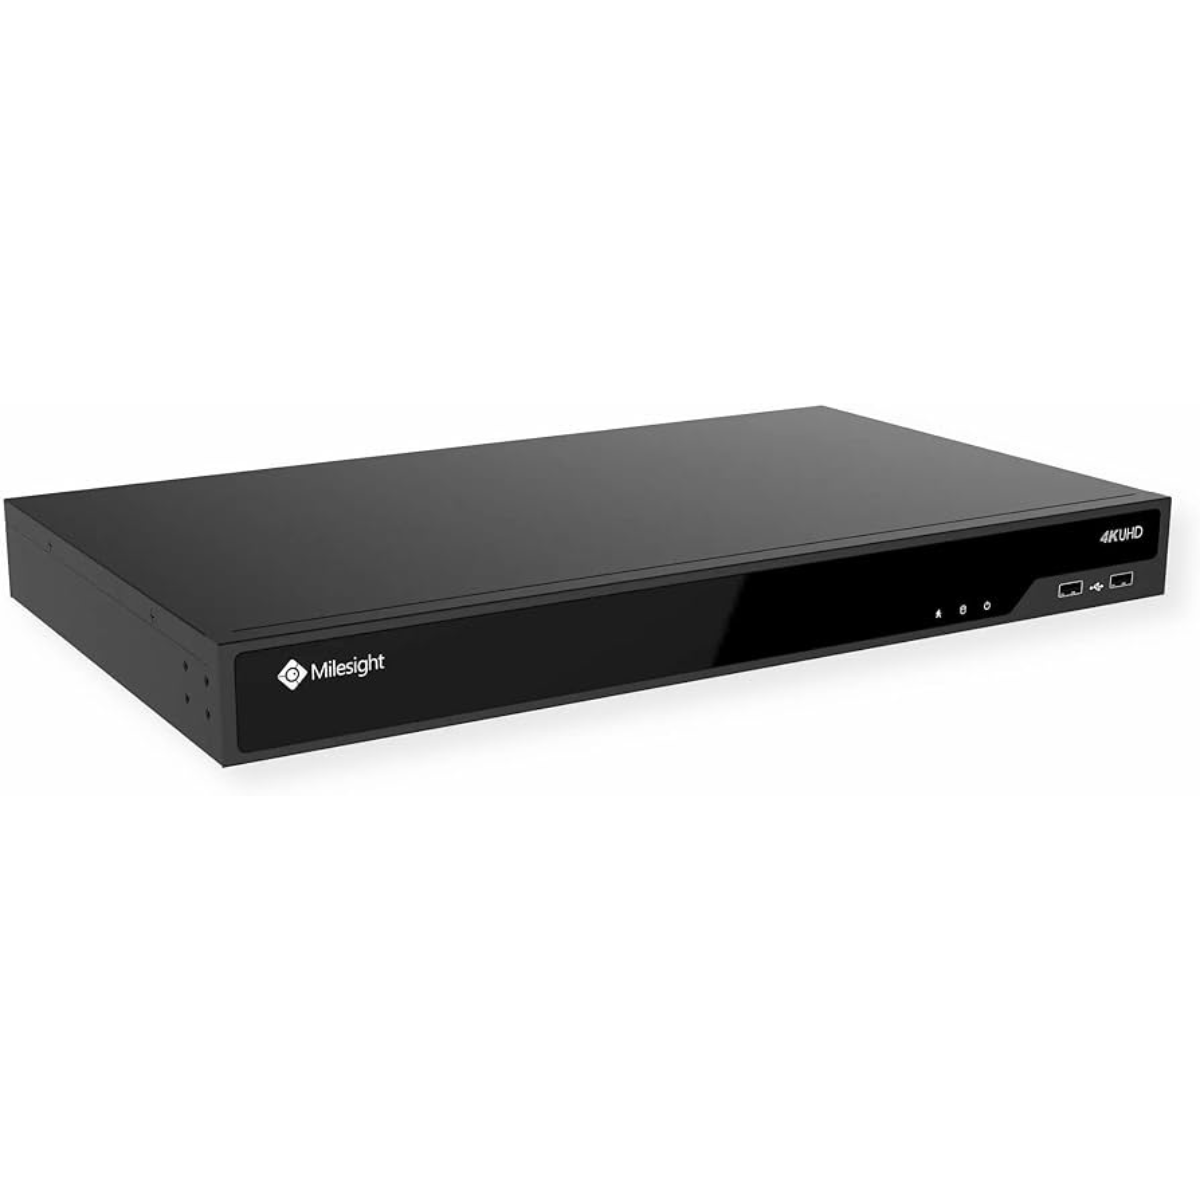 "High-capacity 8-Channel NVR with 2x10TB Storage and HDMI/VGA Output"